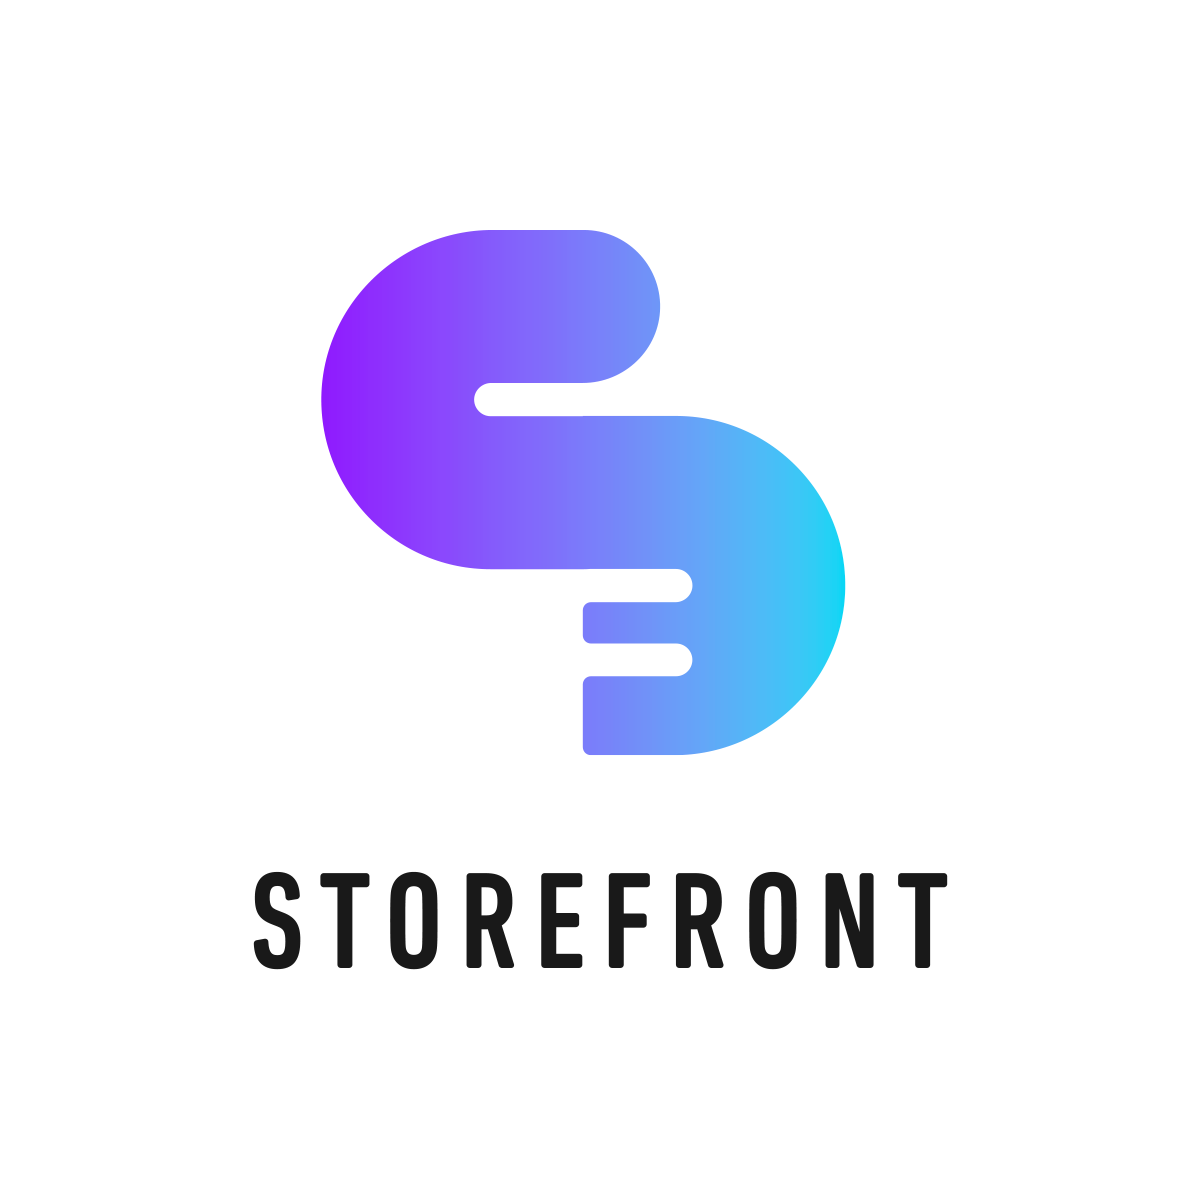 (c) Storefront.be